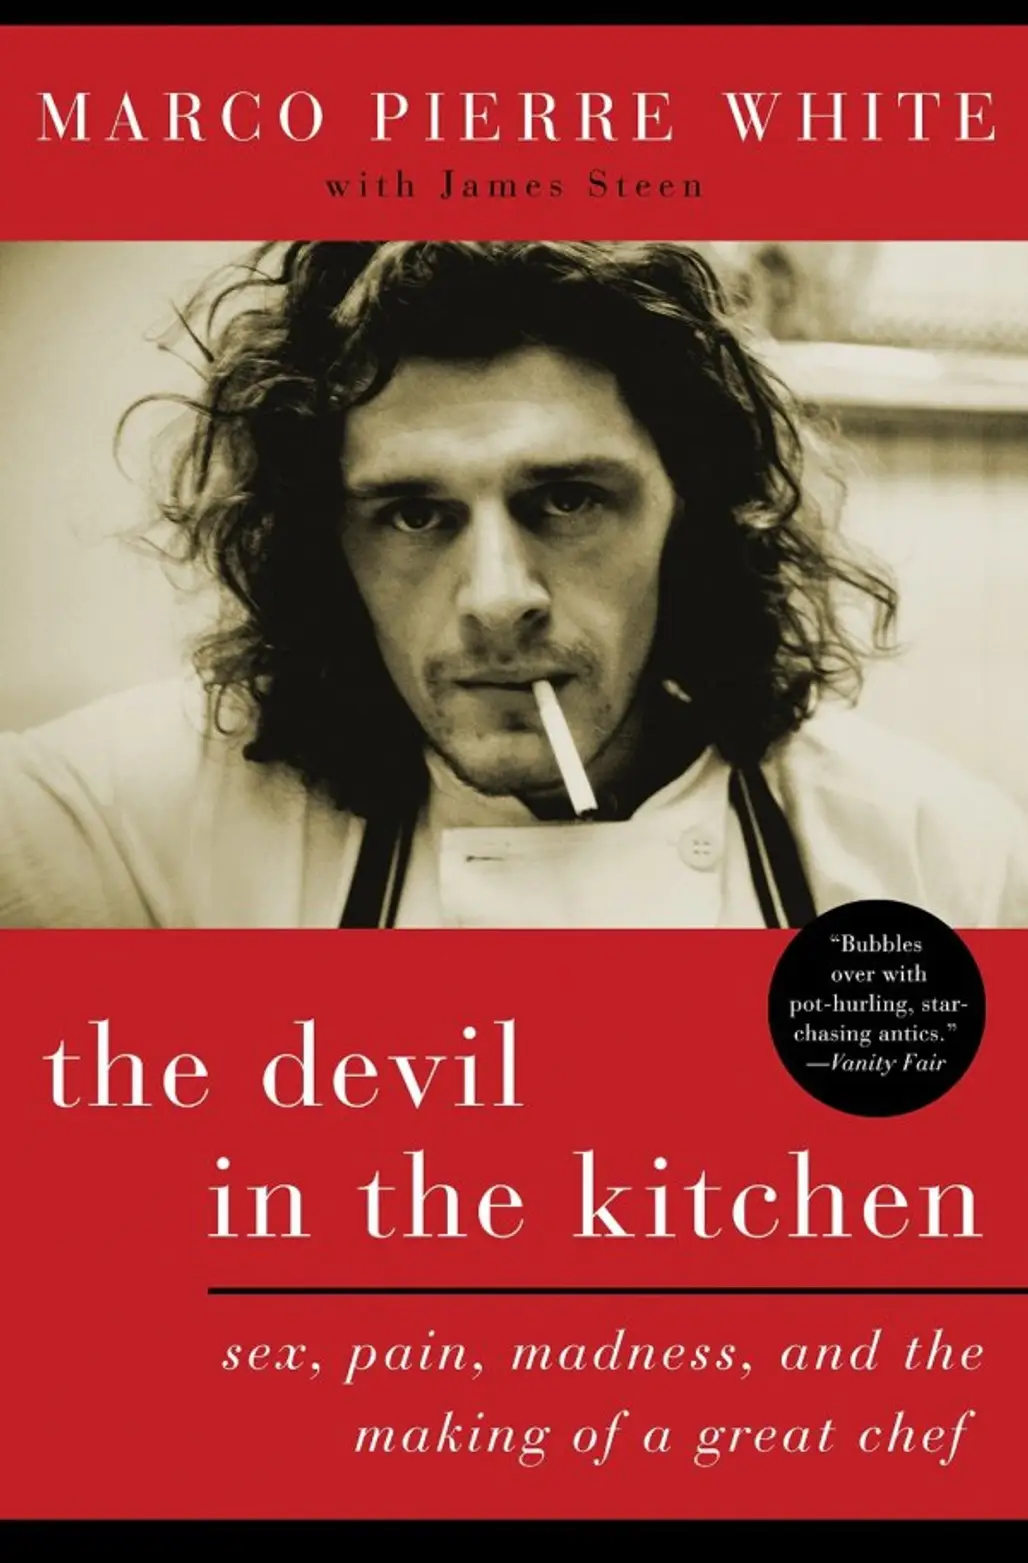 "the Devil in the Kitchen" by Marco Pierre White